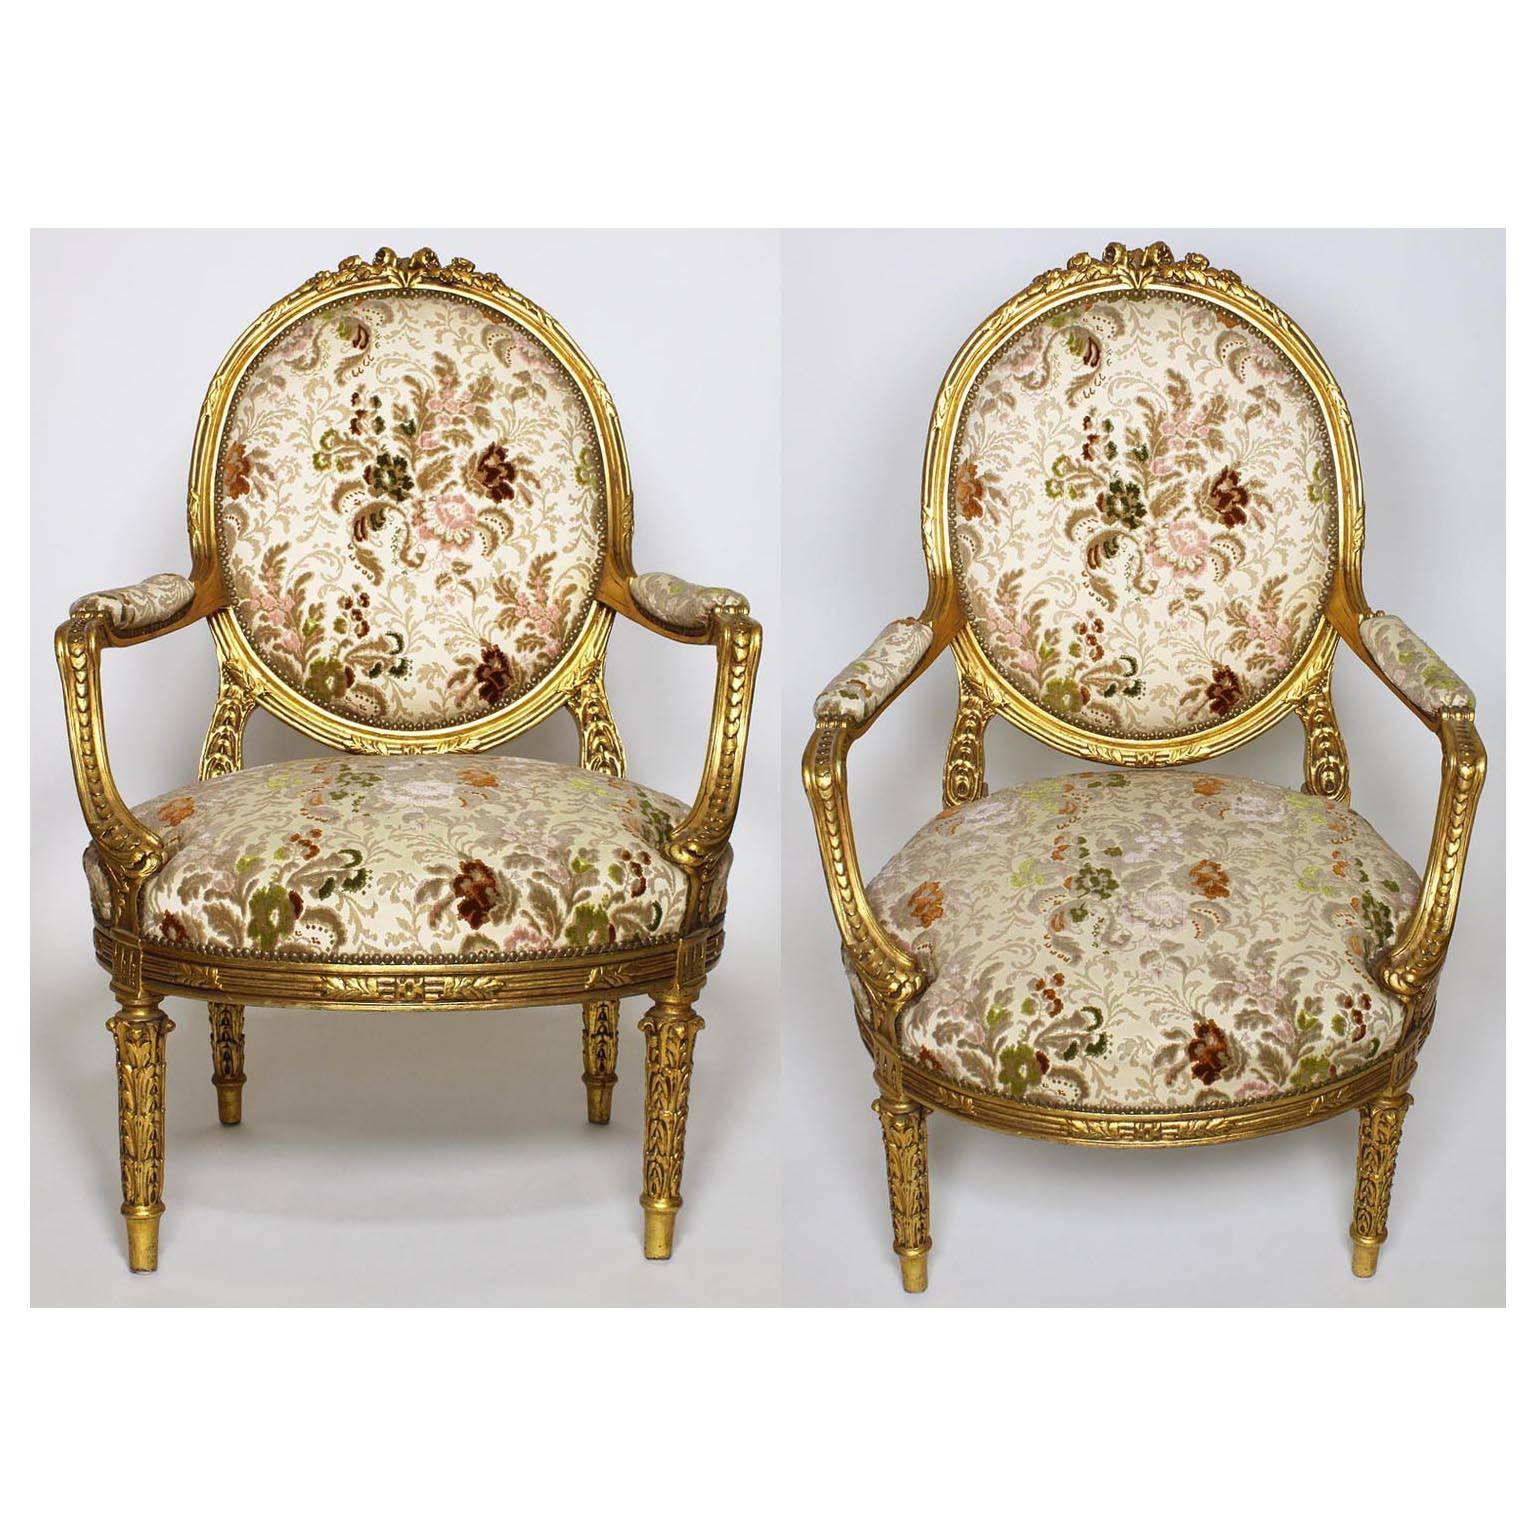 Louis XVI French 19th-20th Century Louis XV Style Giltwood Carved Five-Piece Salon Suite For Sale